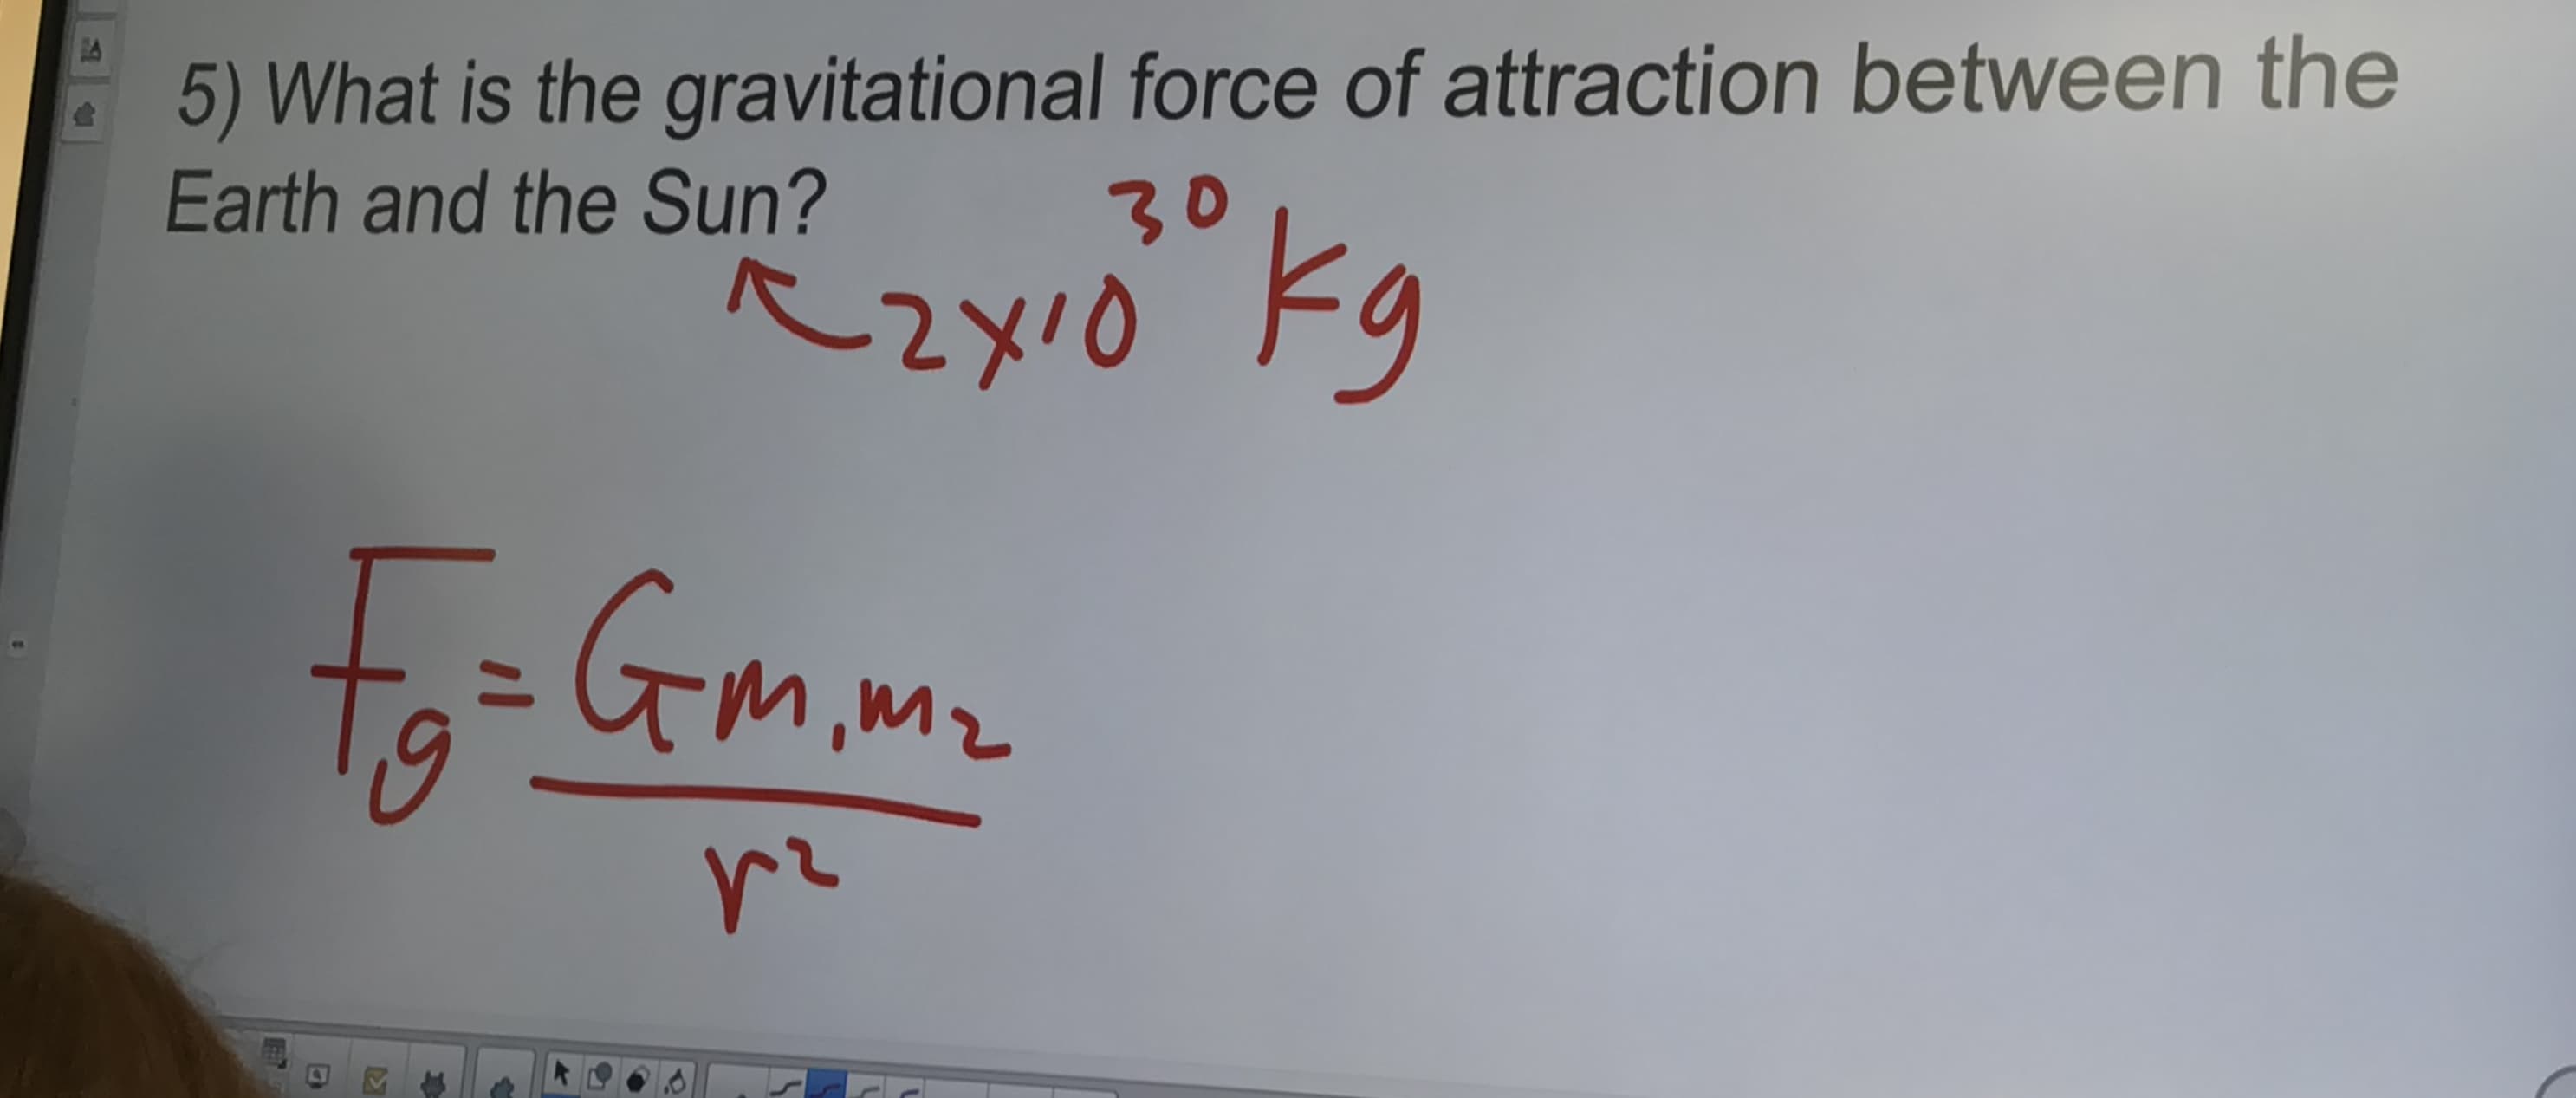 5) What is the gravitational force of attraction between the
Earth and the Sun?
30
R2/0
